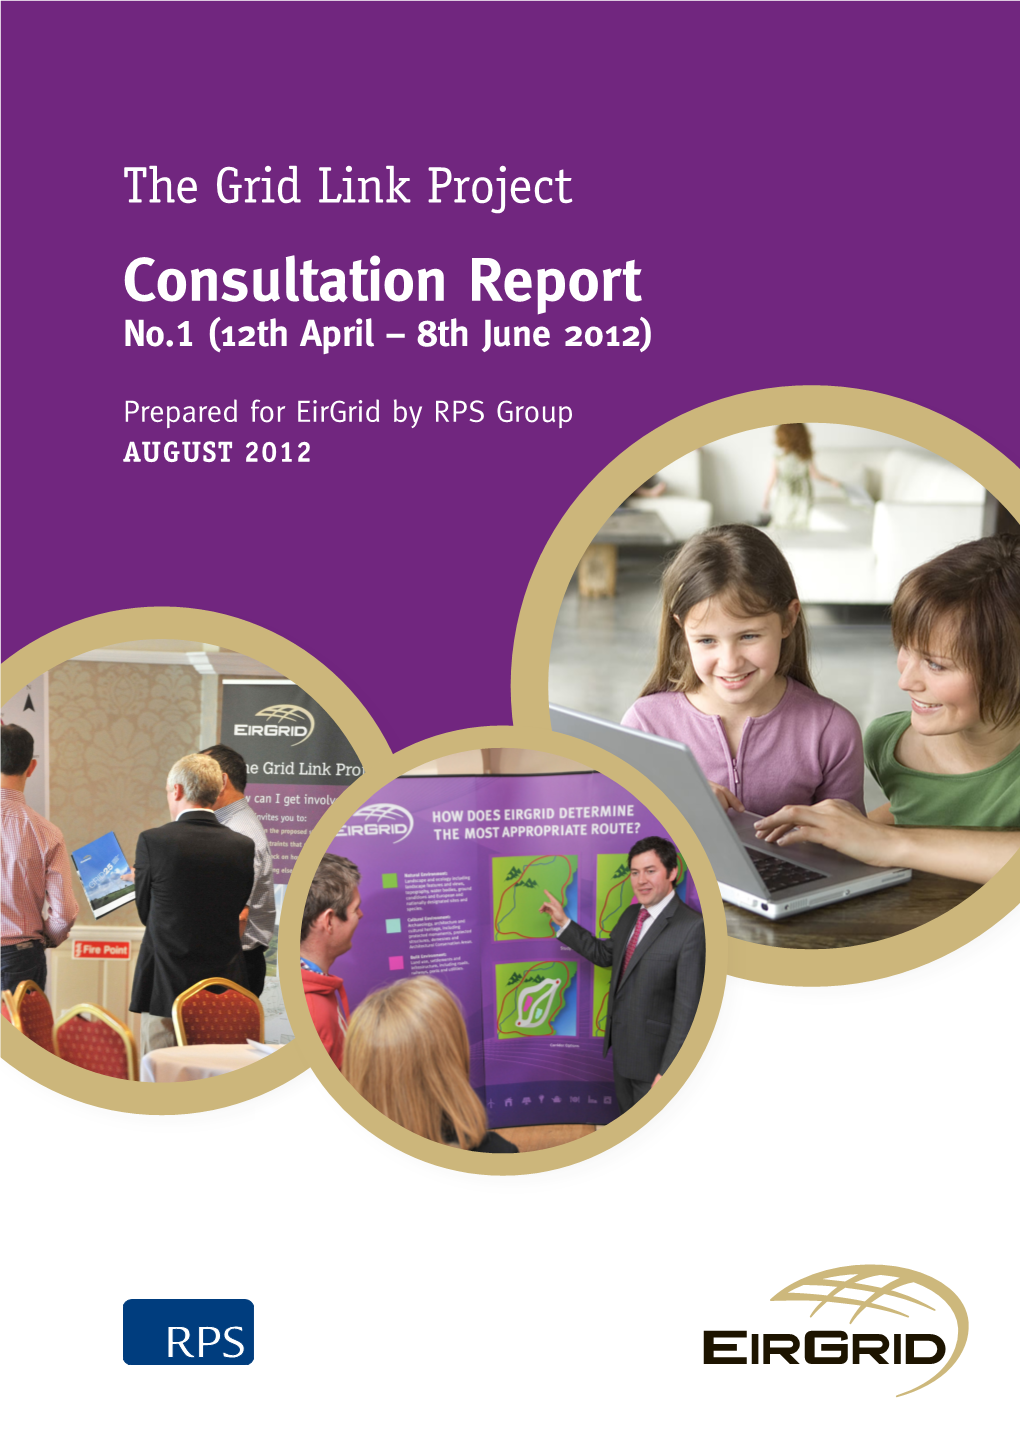 The Grid Link Project Consultation Report No.1 Prepared For